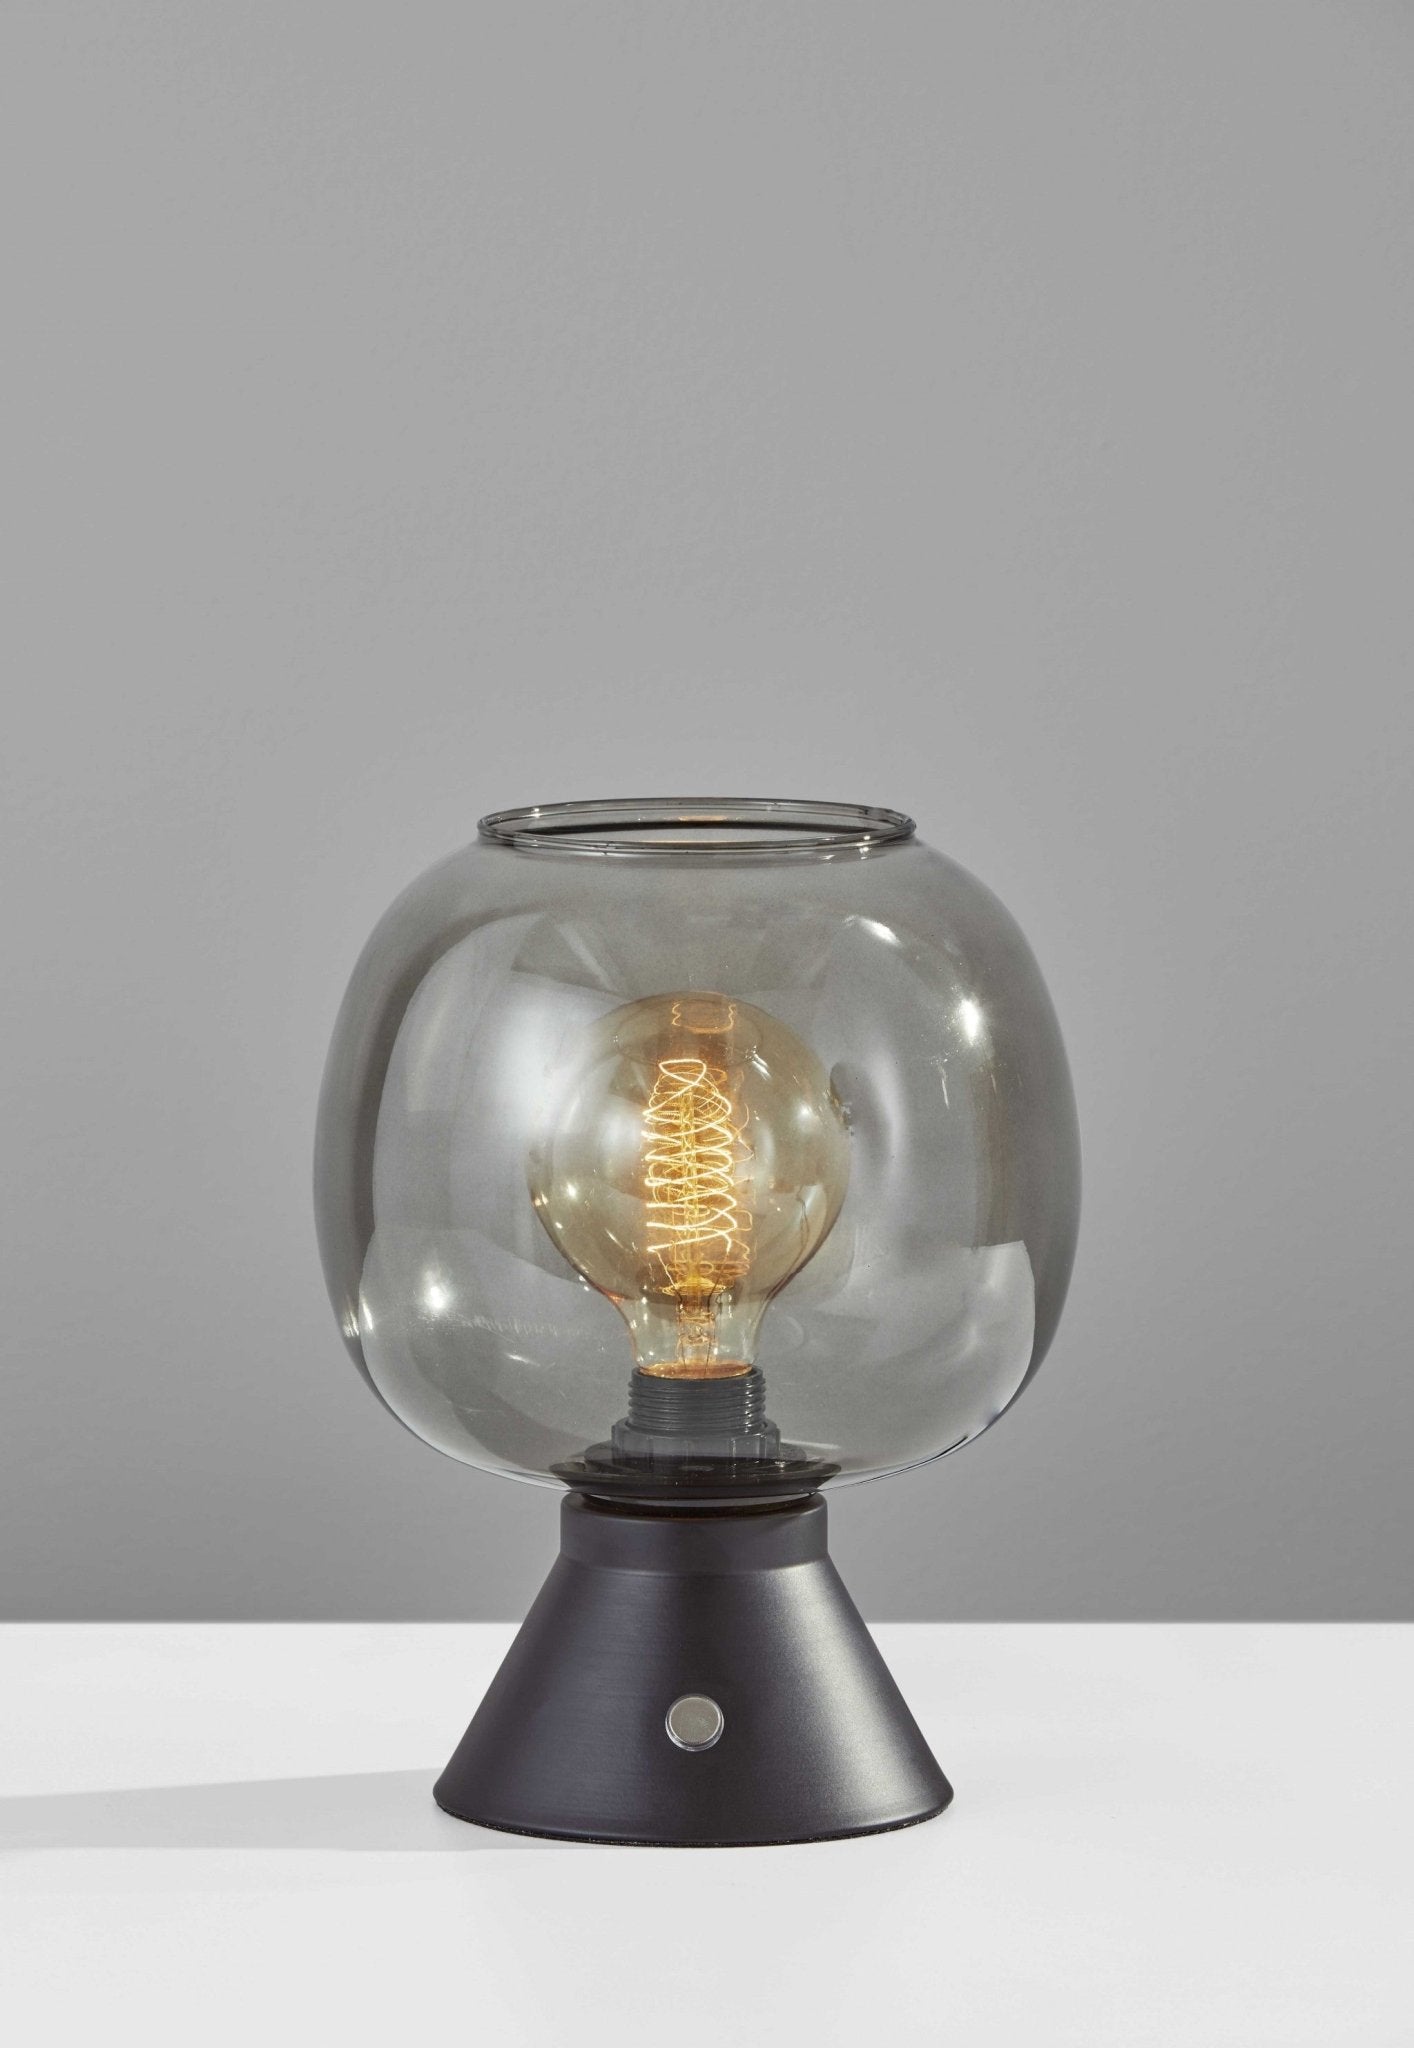 Smoked-Glass-Globe-Shade-With-Vintage-Edison-Bulb-And-Matte-Black-Metal-Table-Lamp-Table-Lamps